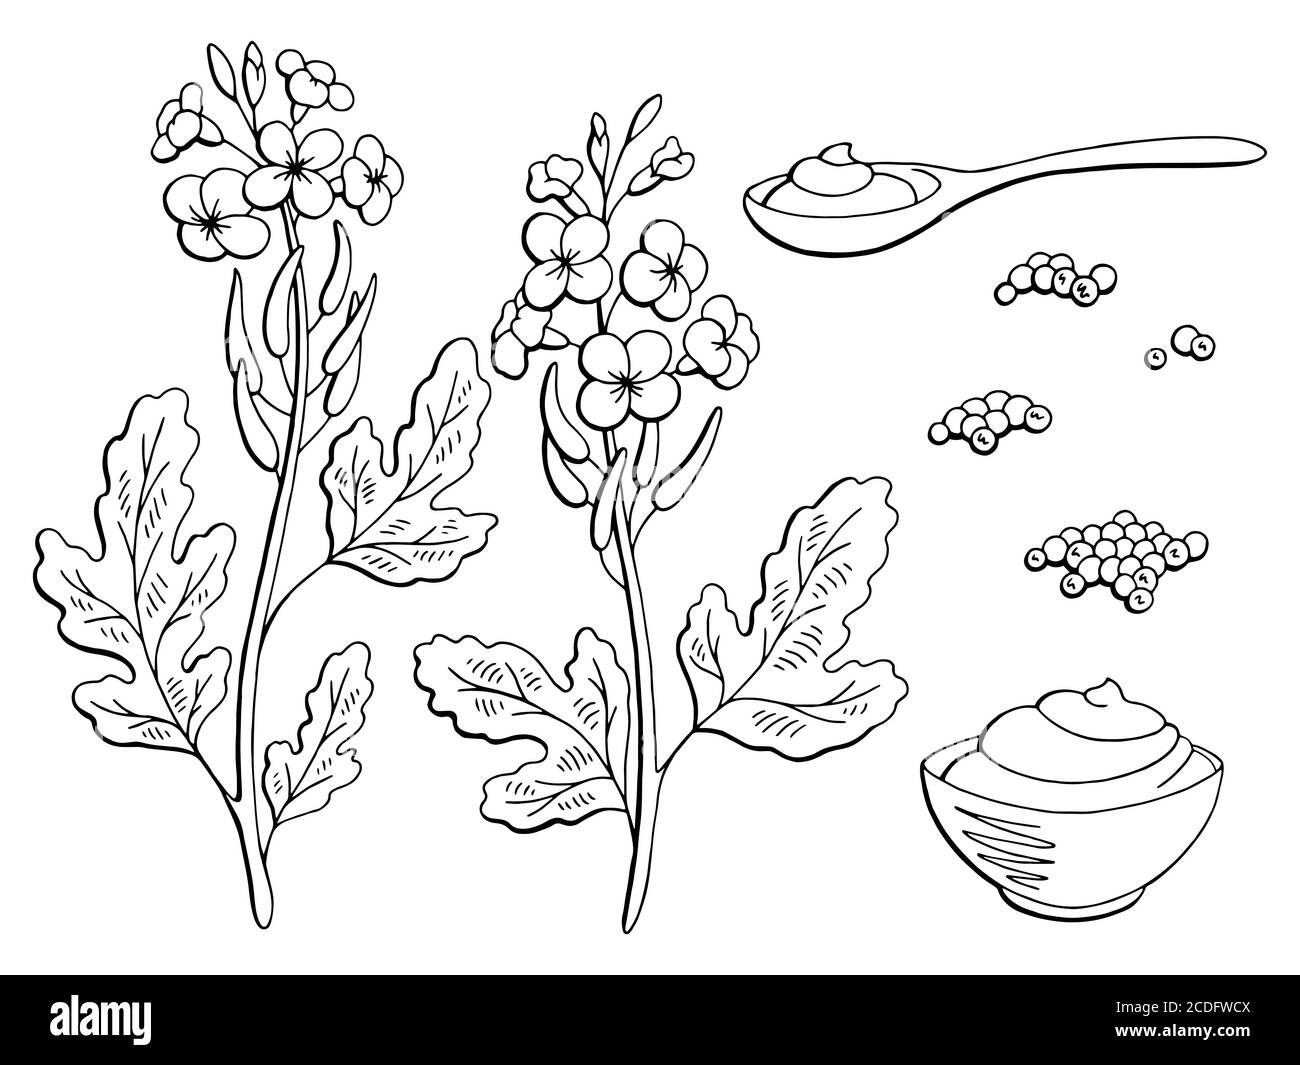 Mustard plant graphic black white isolated sketch set illustration vector Stock Vector